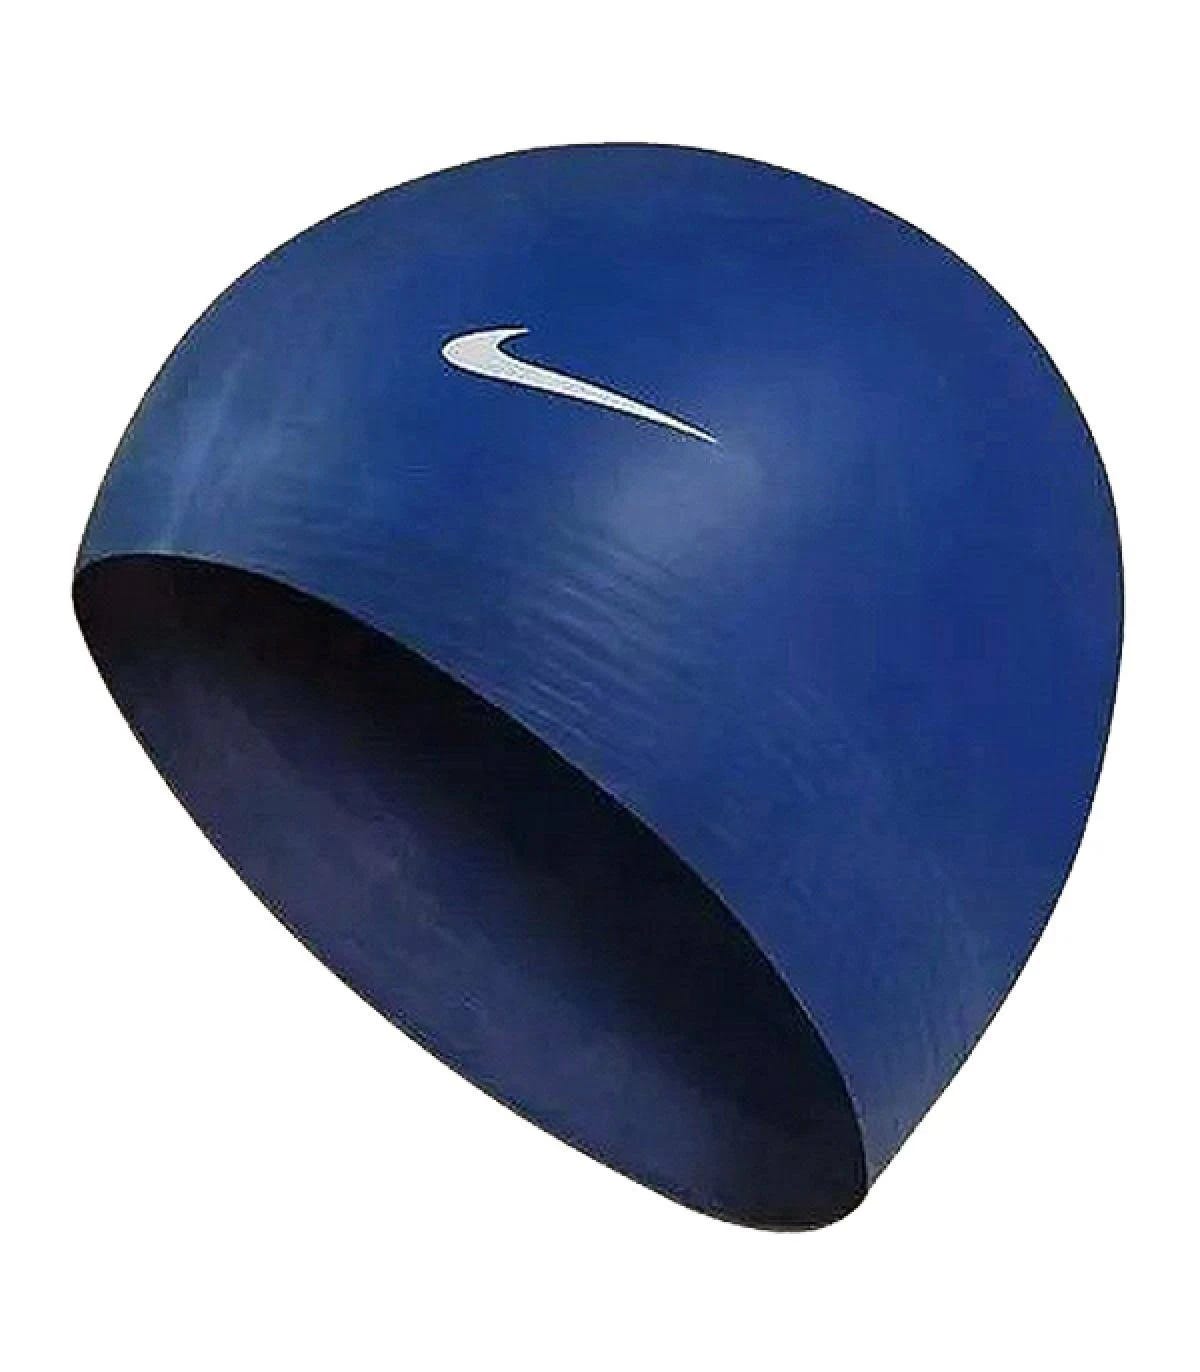 Nike 93050 Swimming Cap for Streamlined Performance | Image